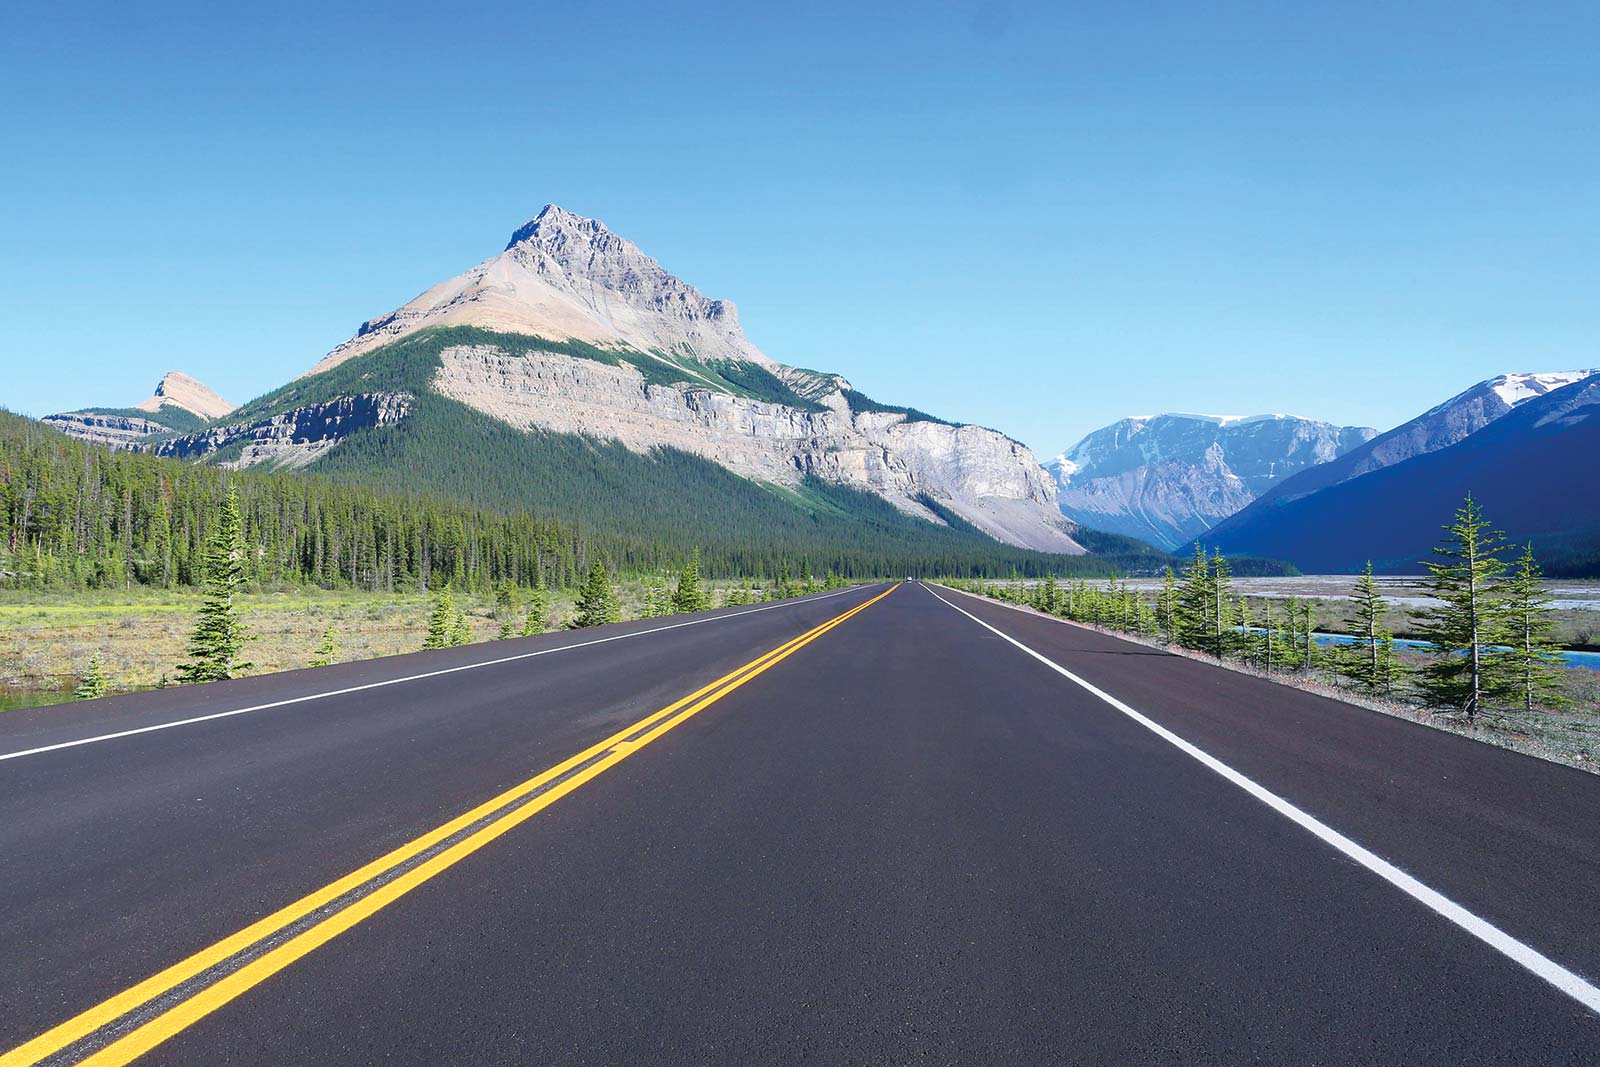 Drive the This scenic highway will take your breath away A week in Banff - photo 17